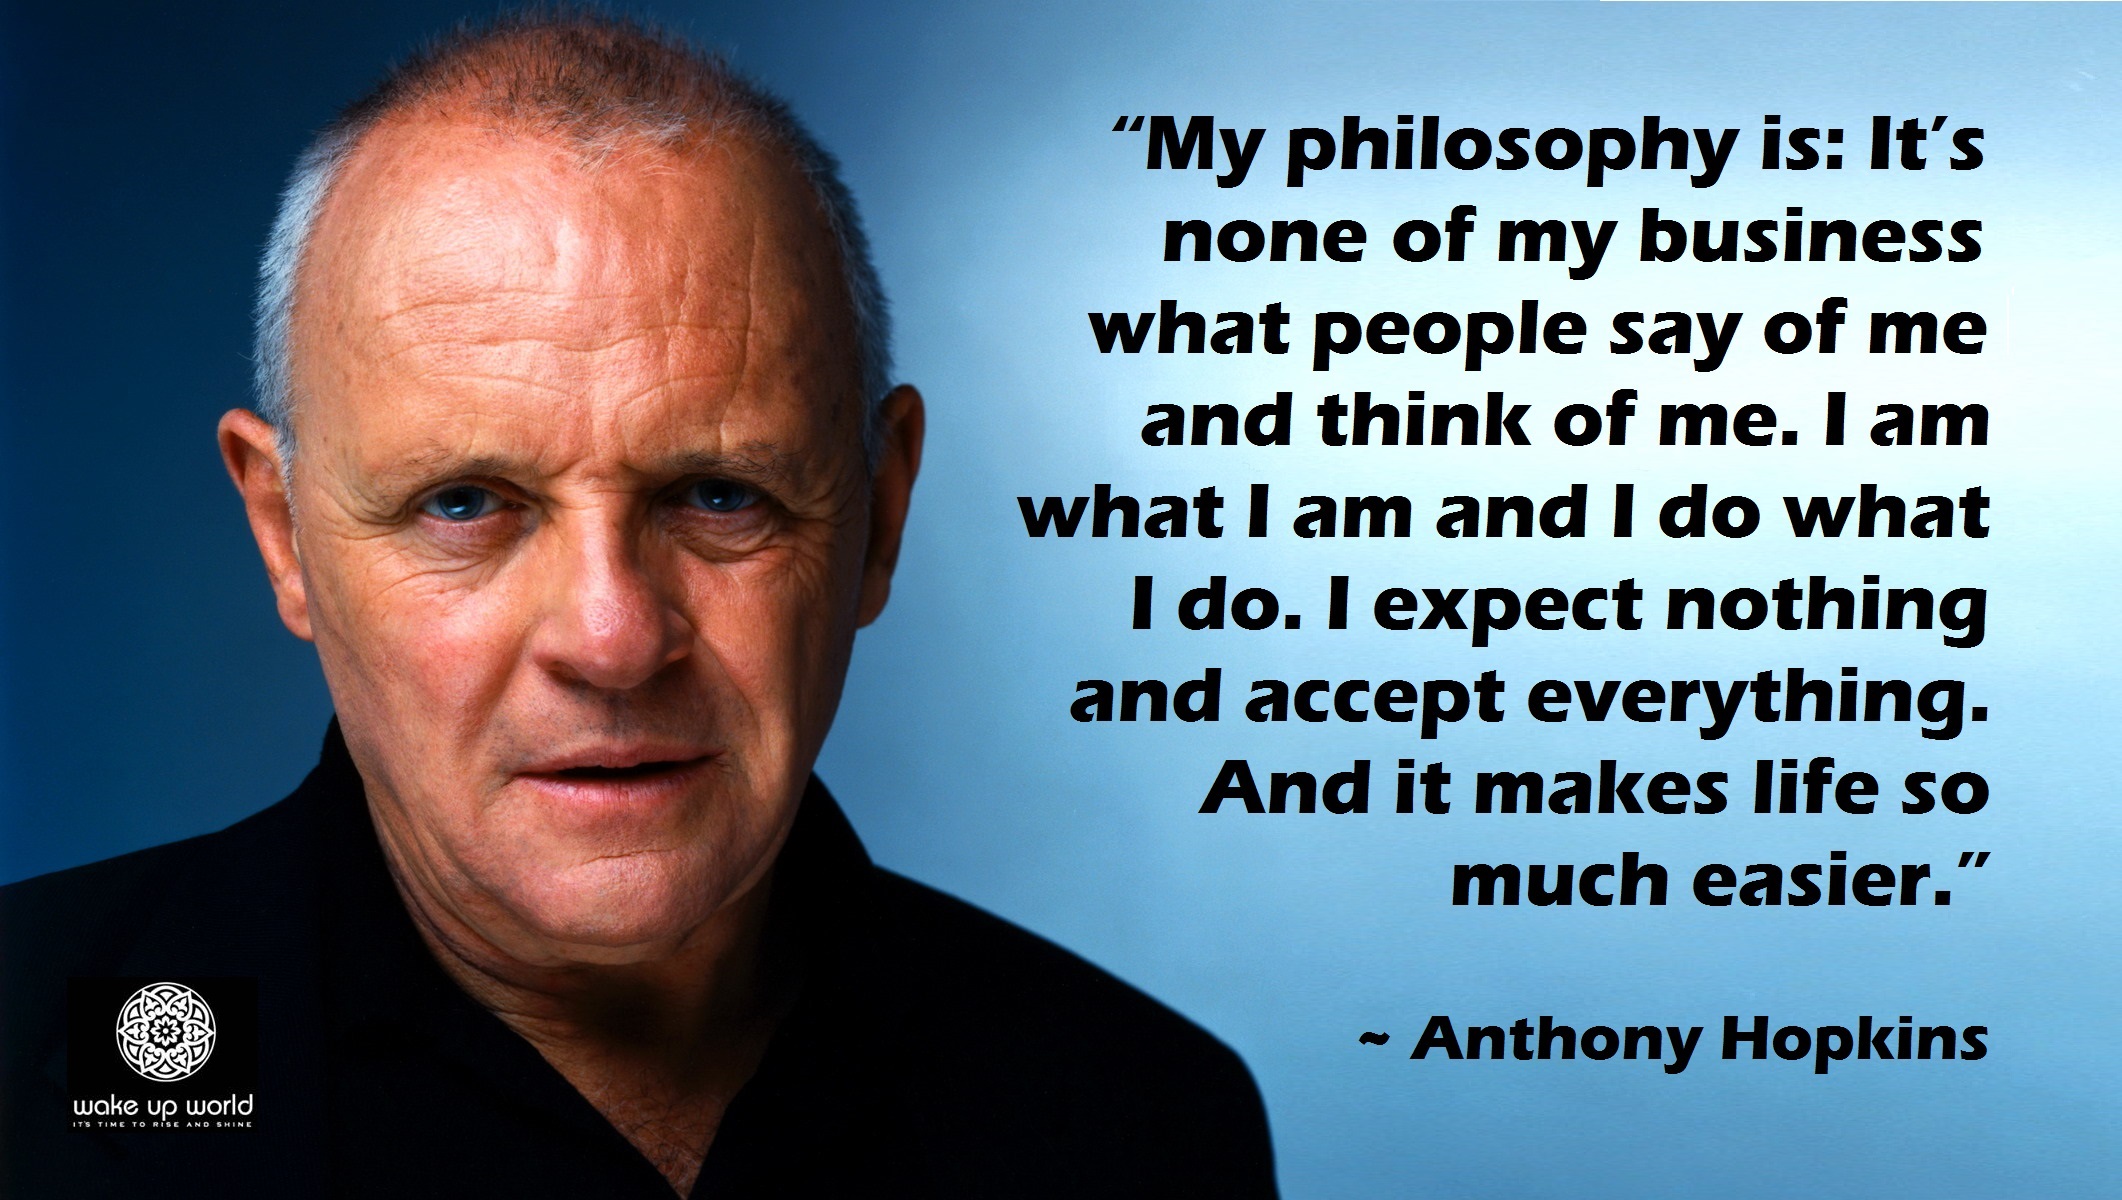 You're Not a Mind Reader - Stop Worrying What Other People Think - Anthony Hopkins quote